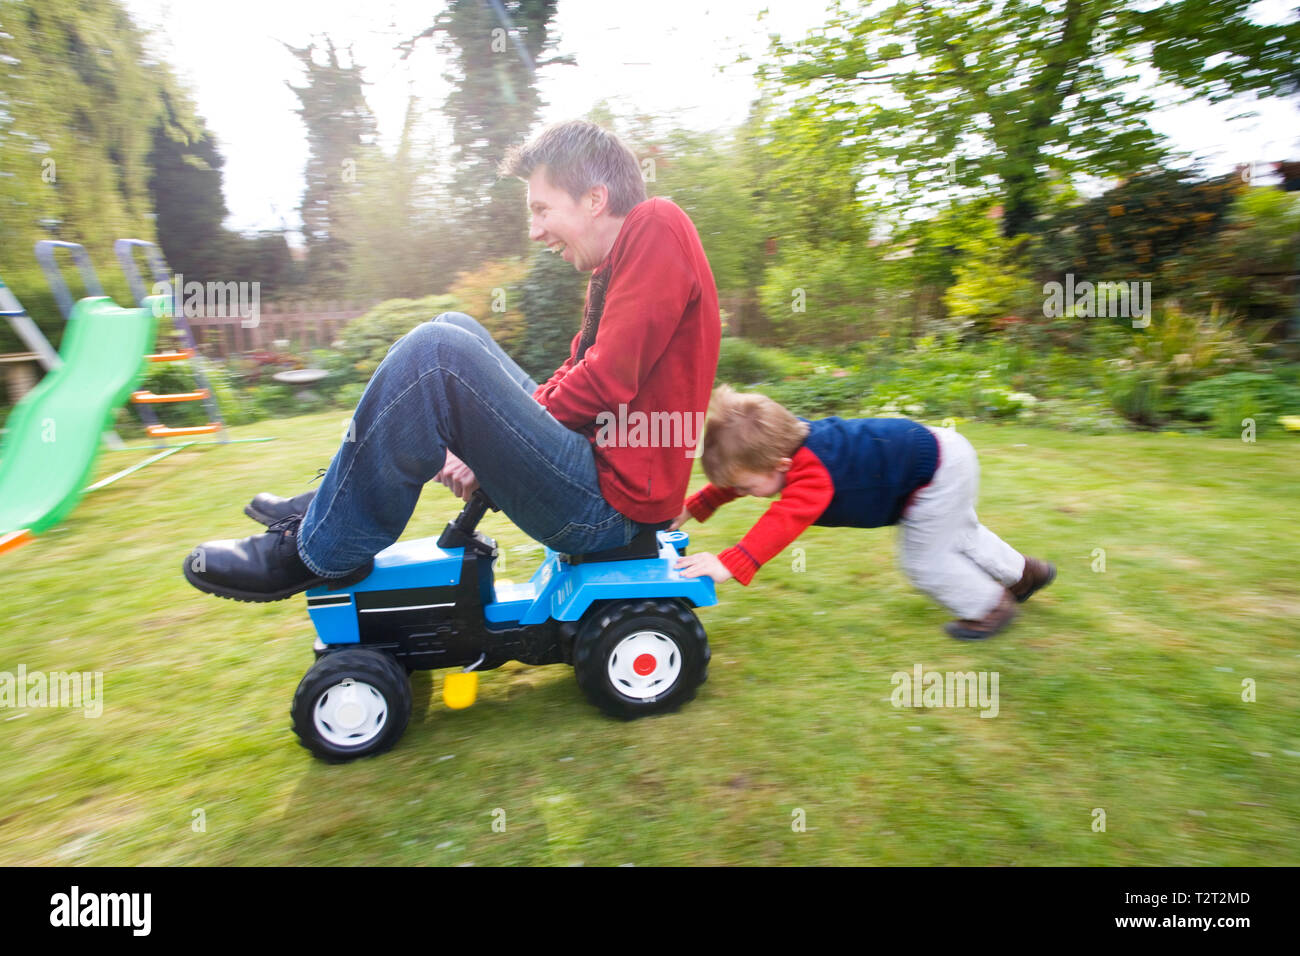 Father pushing his son on a toy tractor in their back garden Stock Photo